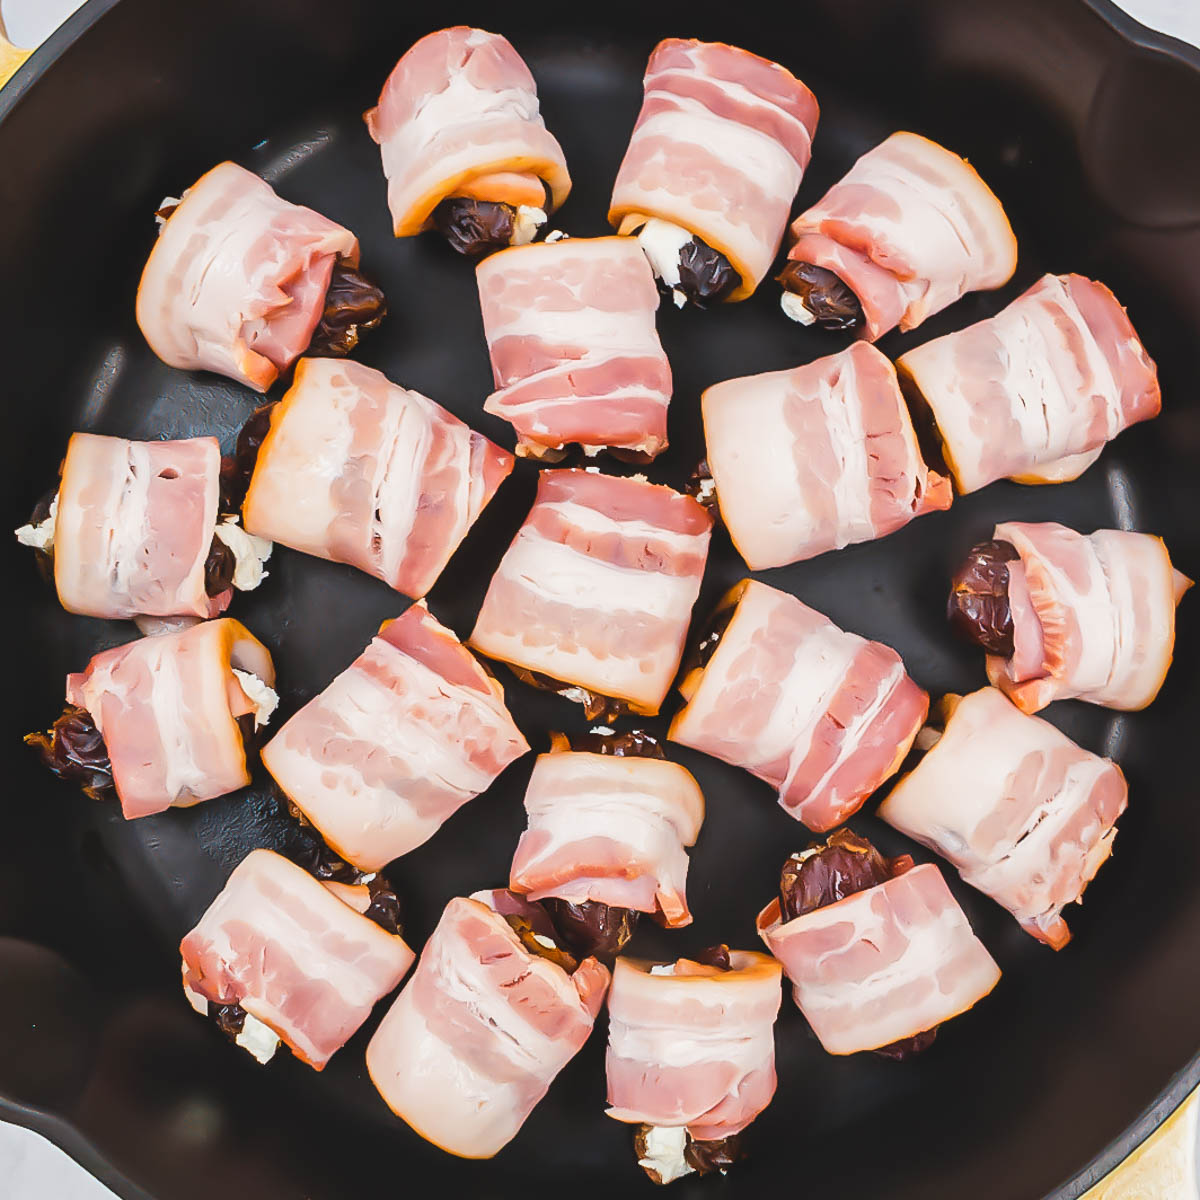 Stuffed dates wrapped in bacon about to be fried in a cast iron pan.